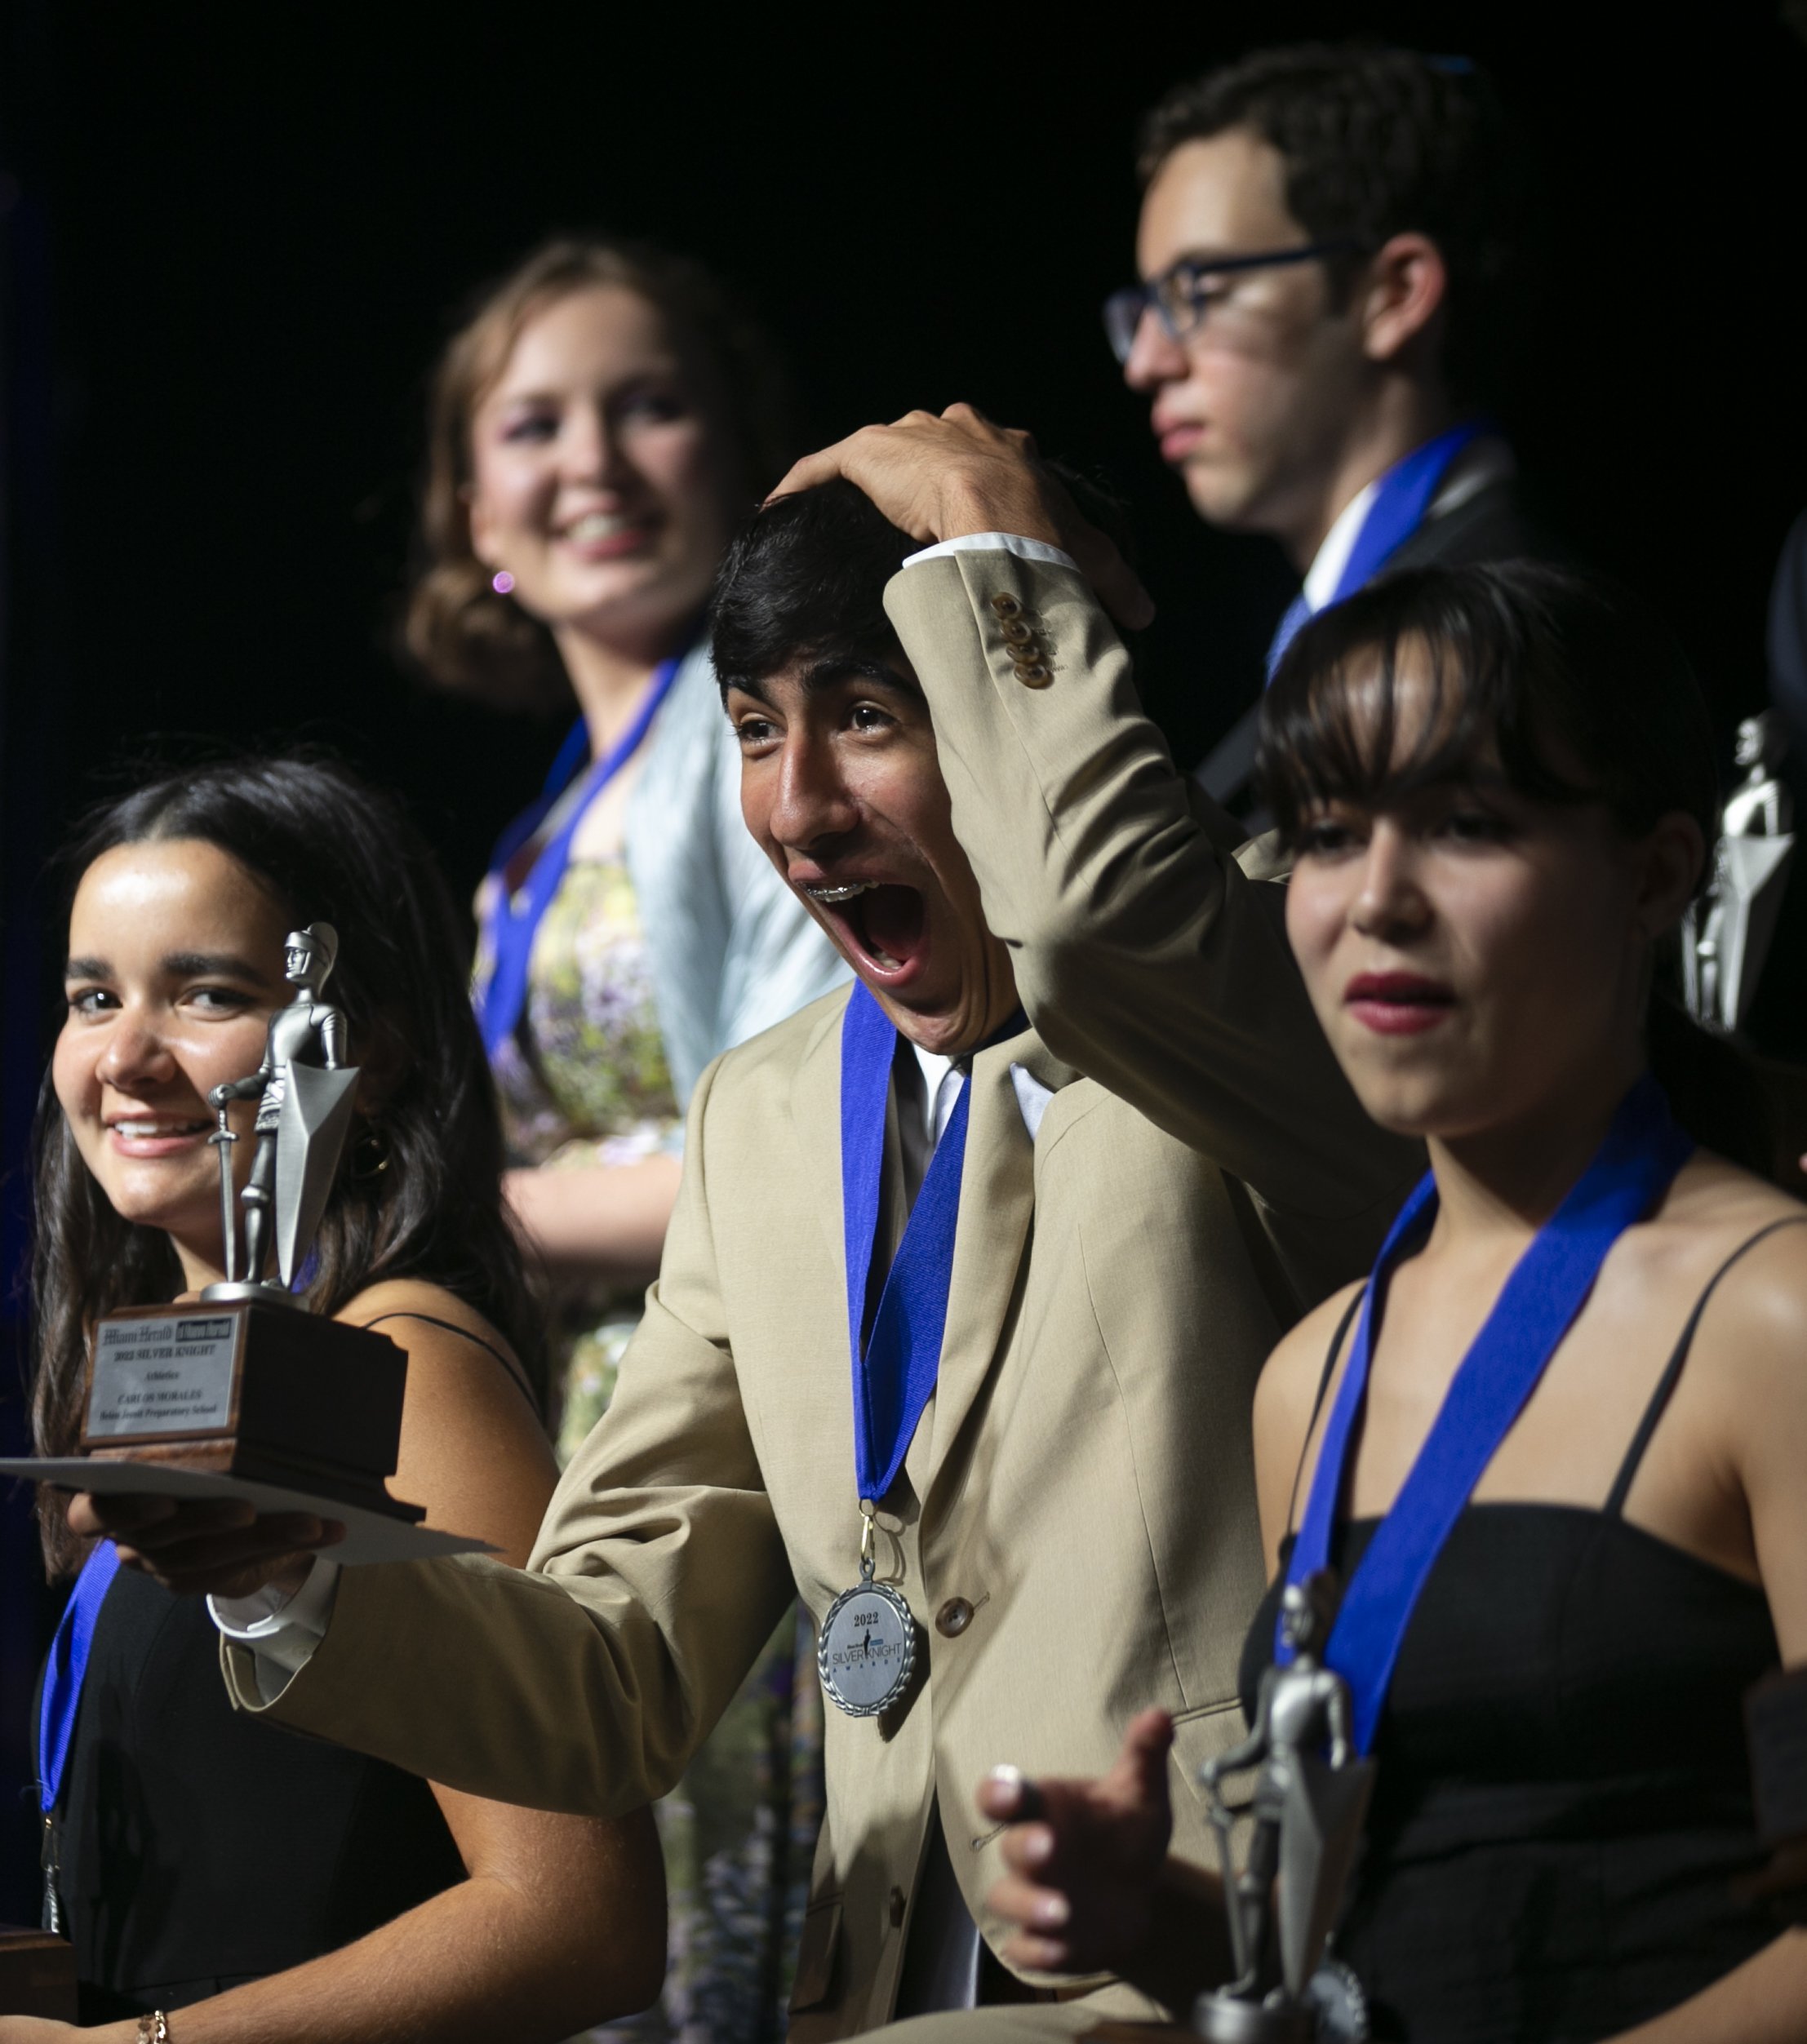  Silver Knight winner in Athletics Carlos Morales, center, from Belen Jesuit Preparatory School, center, reacts during the Miami Herald &amp; el Nuevo Herald 64th Silver Knight Award Ceremony at the James L. Knight Center in downtown Miami, Florida o